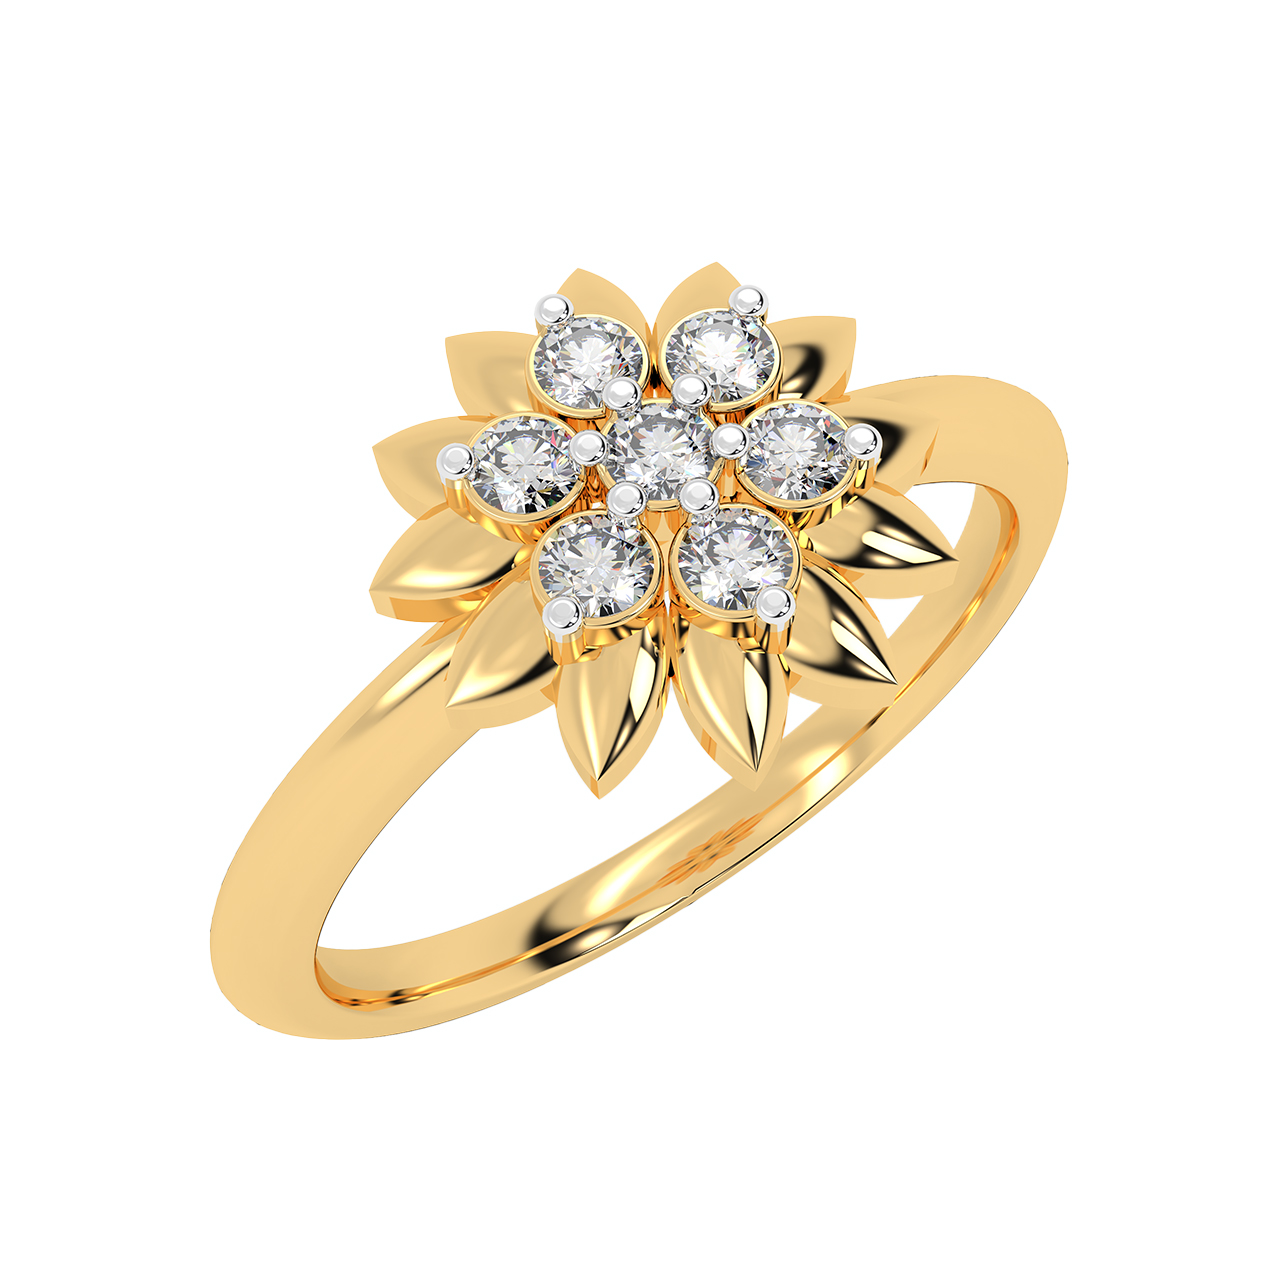 Engagement Rings - Online Jewelry Store